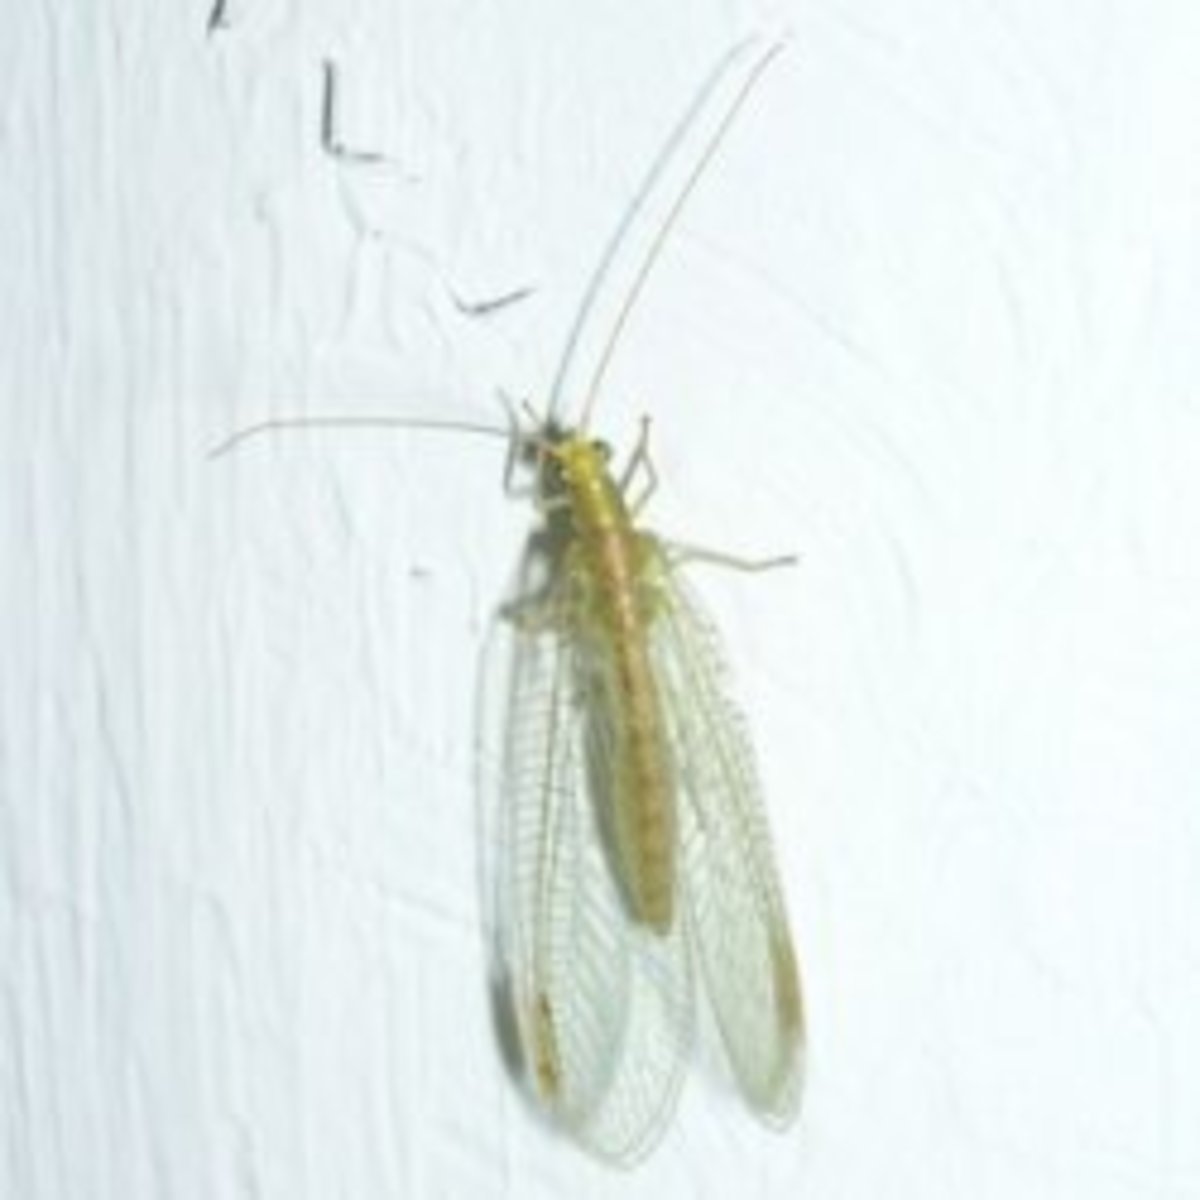 The Common Green Lacewing, Our Ally Against Aphids and Other Pests